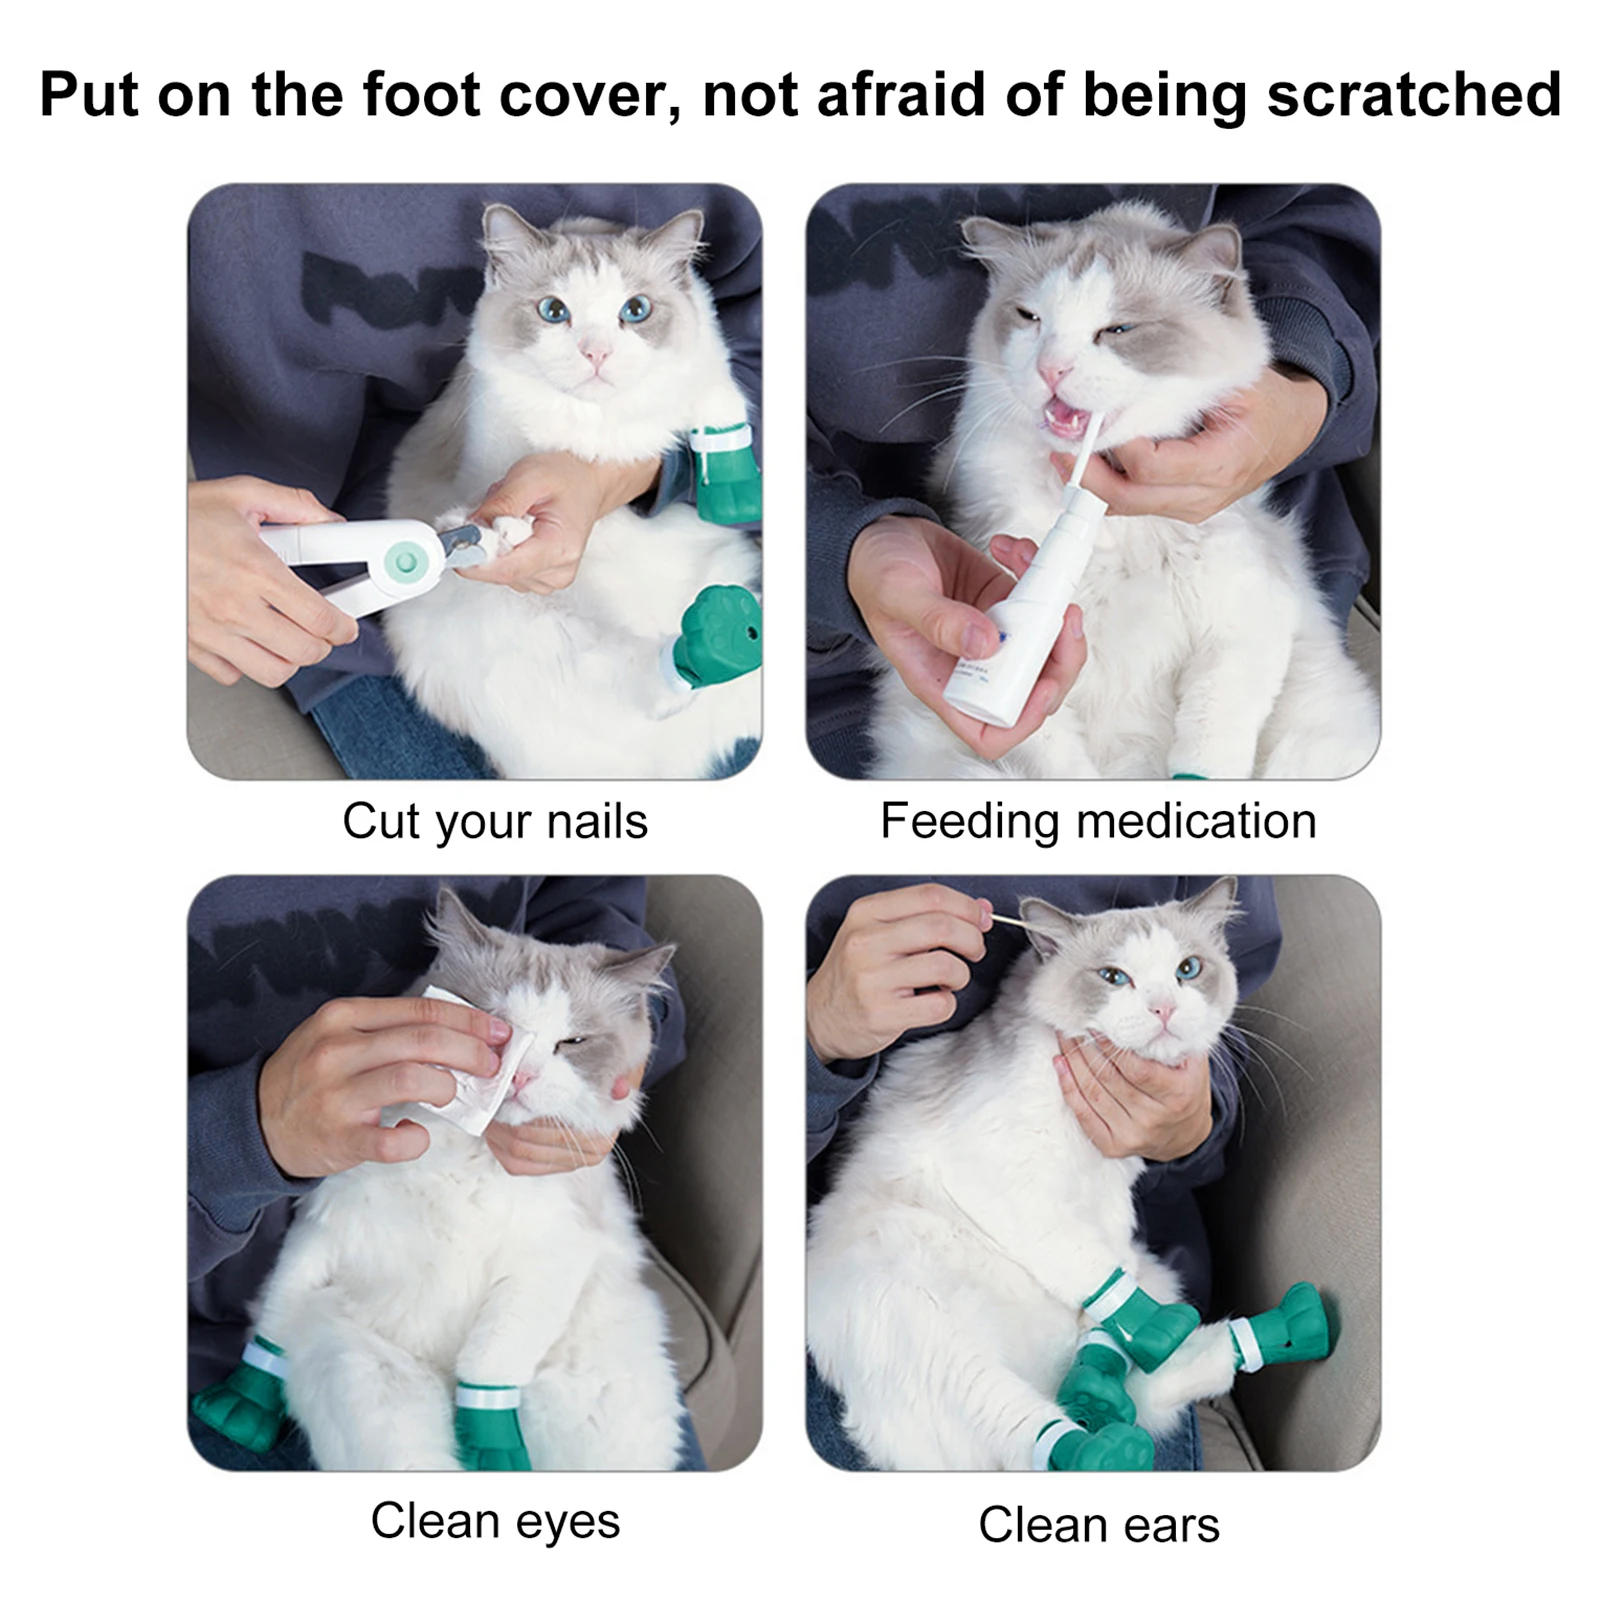 Trimming Cats' Claws: a Step-by-Step Guide